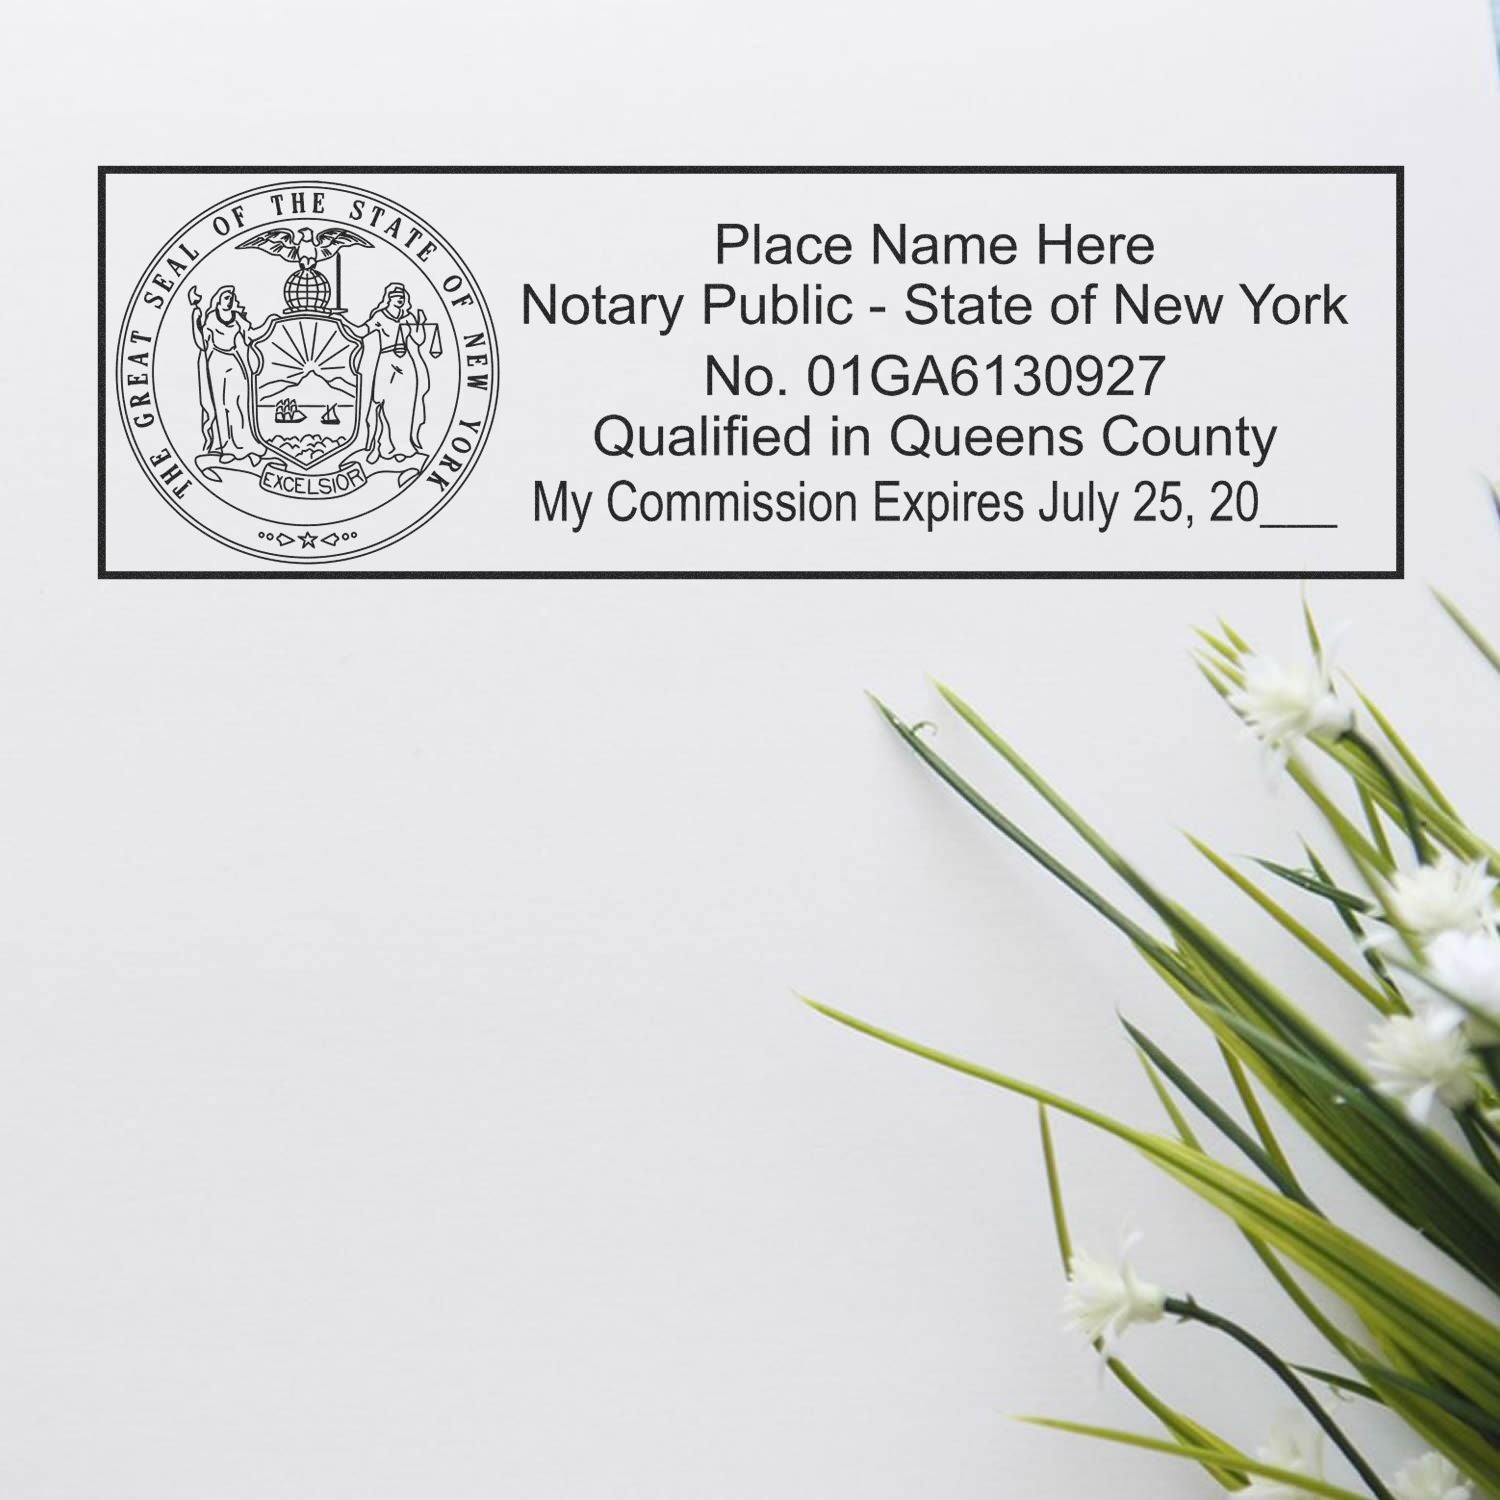 The main image for the Wooden Handle New York State Seal Notary Public Stamp depicting a sample of the imprint and electronic files